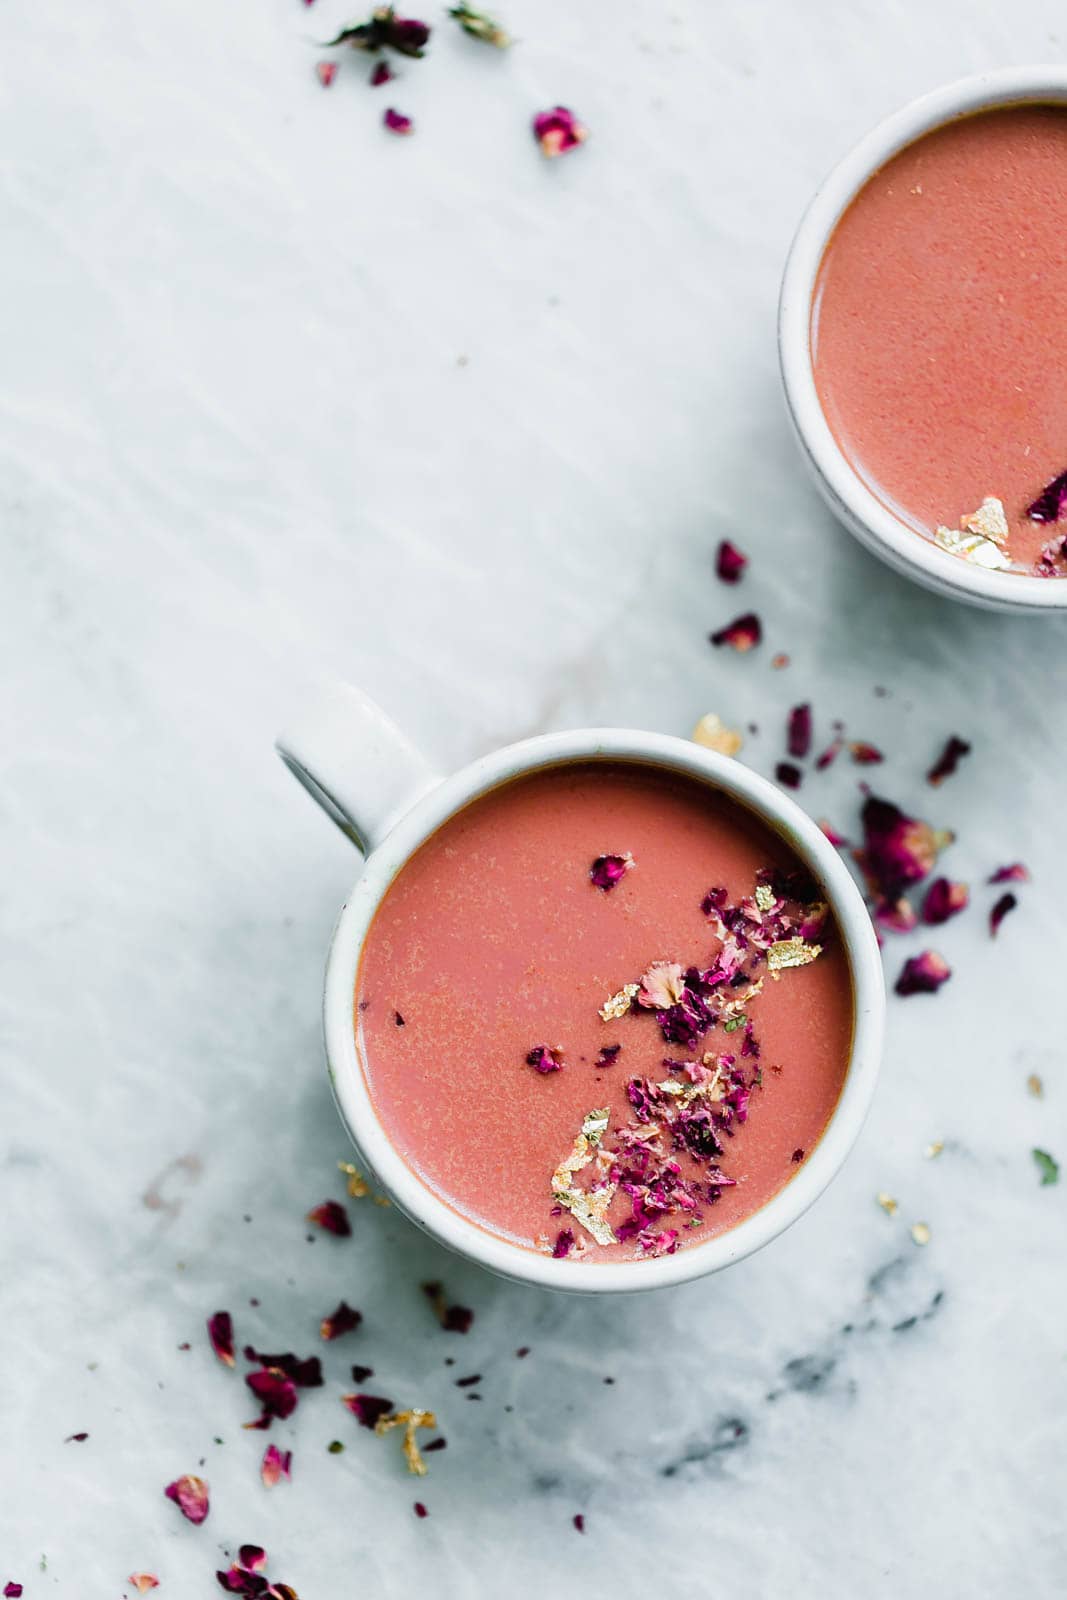 Elevate your bedtime routine with this Pink Moon Milk fit for a princess. Made with vanilla almondmilk, beetroot, turmeric, agave, dried rose hips, and edible gold.